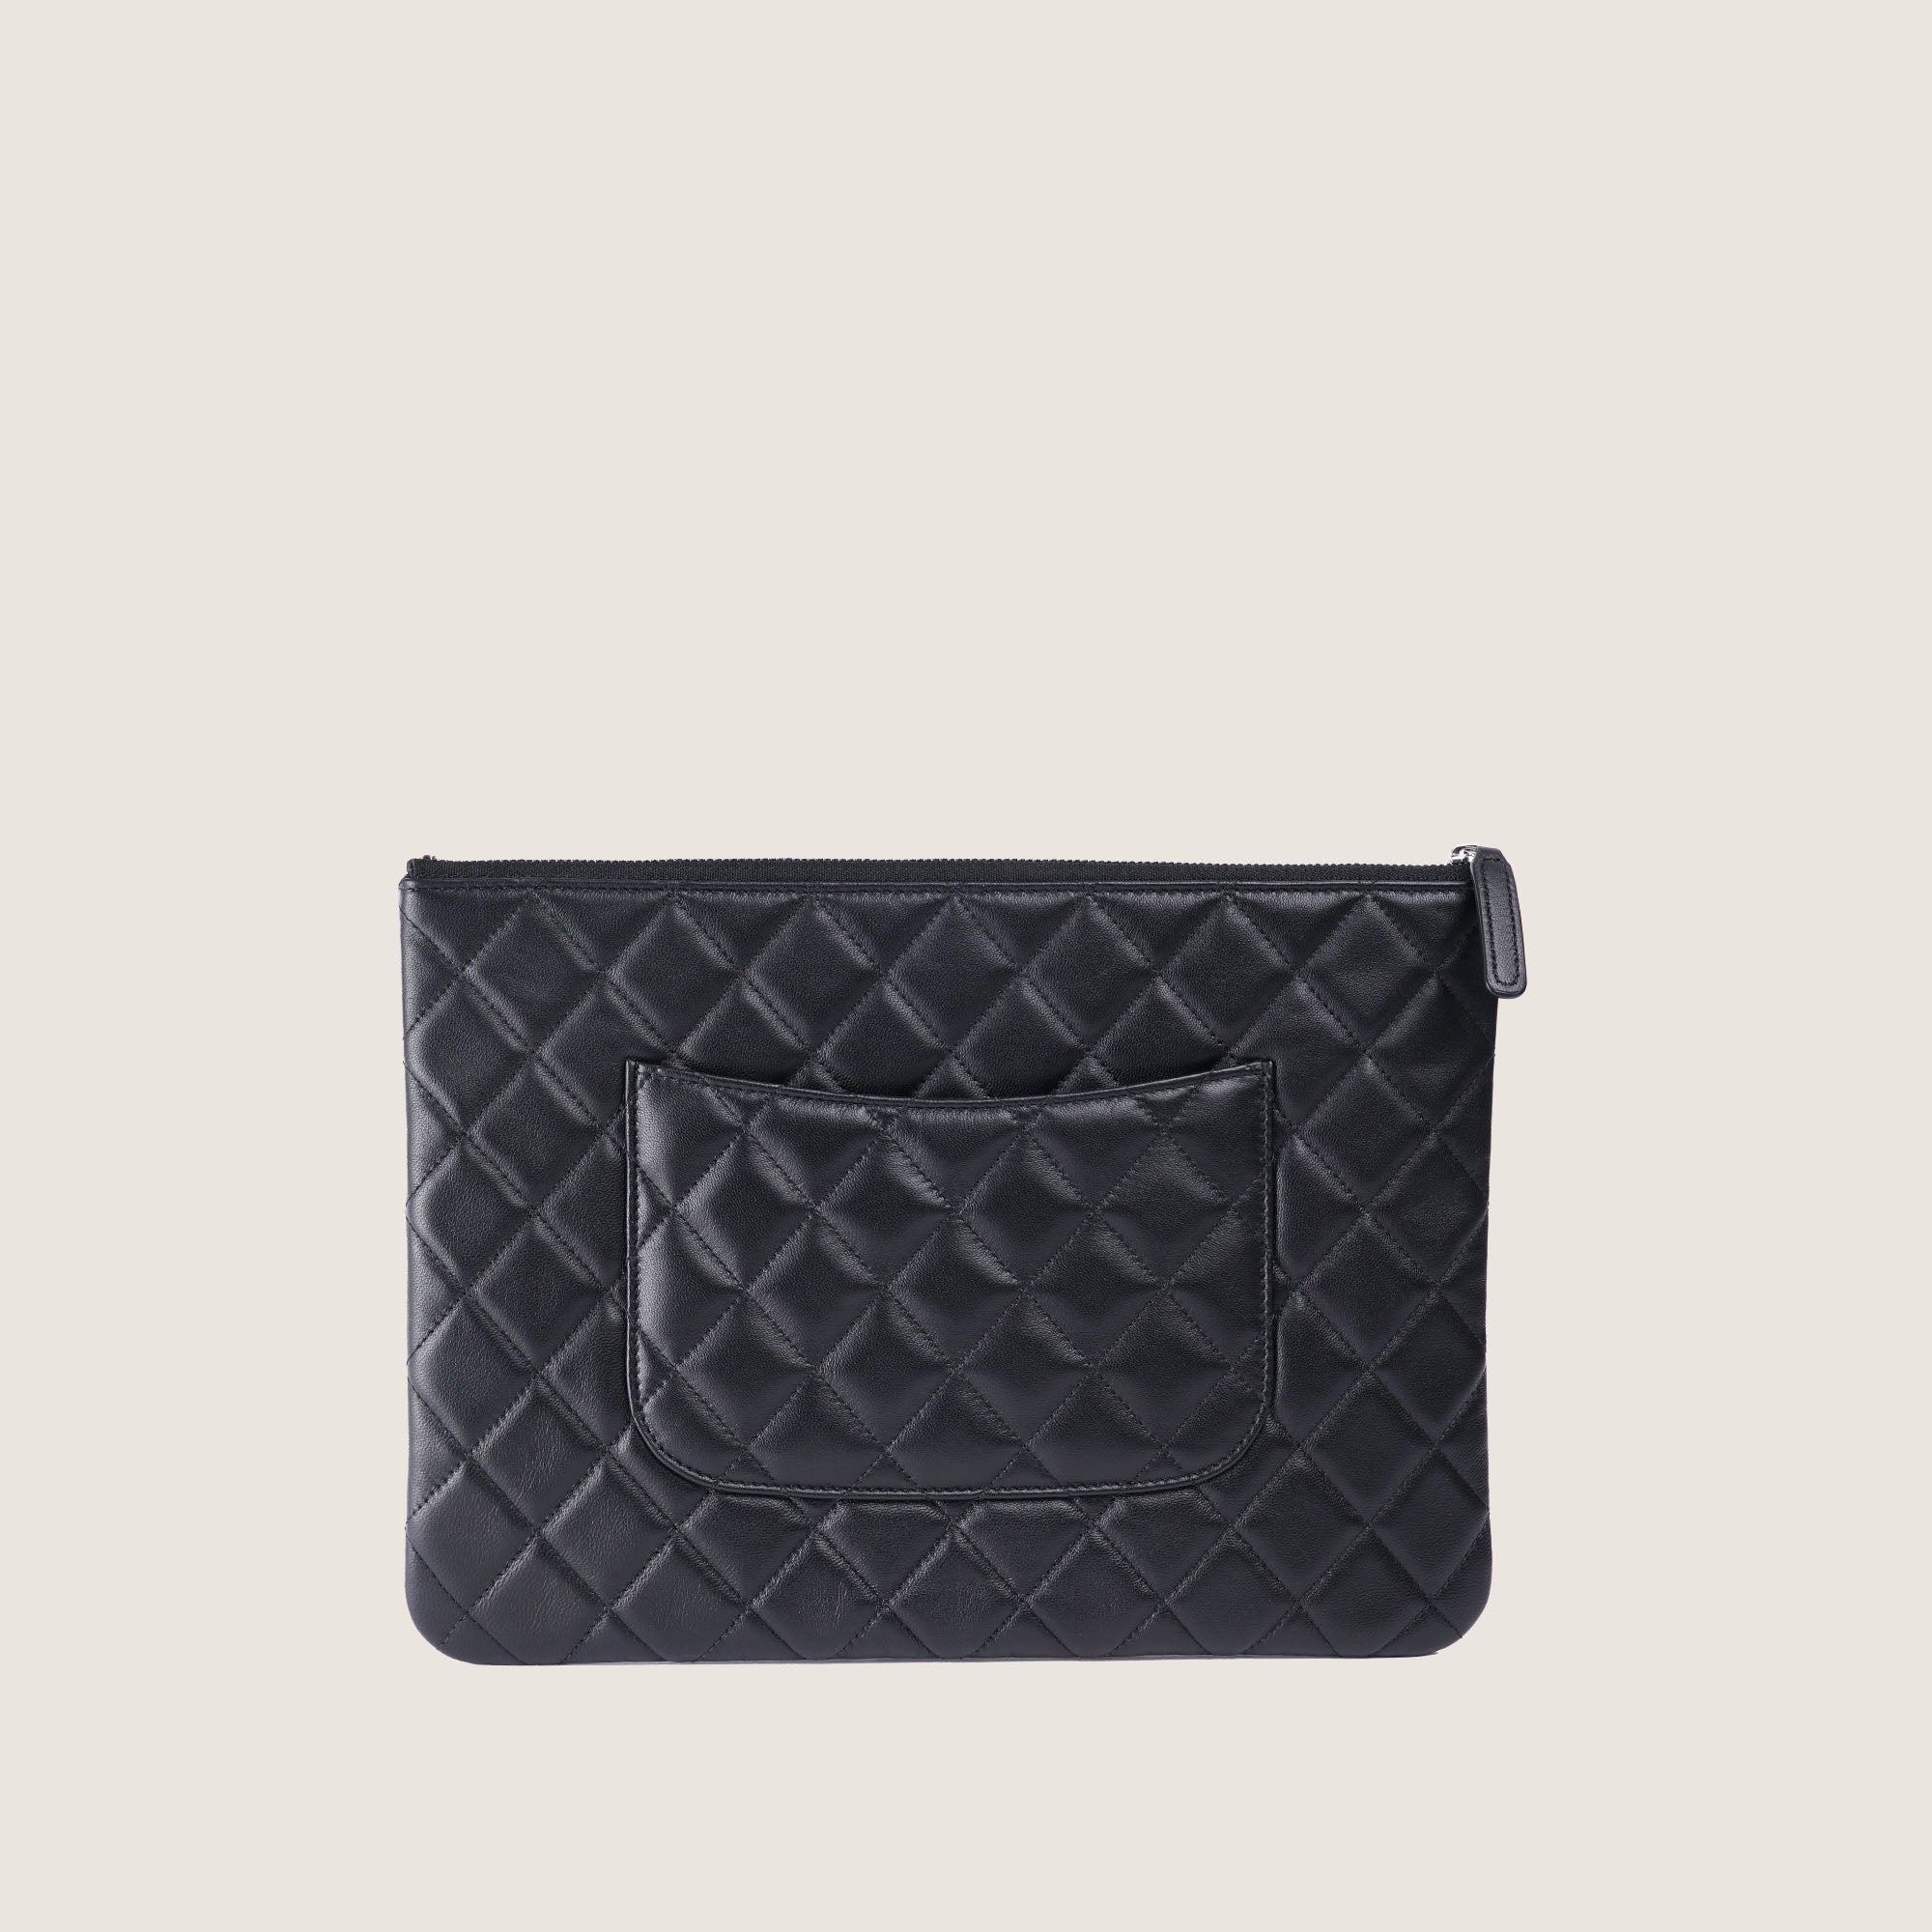 Chanel Pouch Black Lambskin - CHANEL - Affordable Luxury image